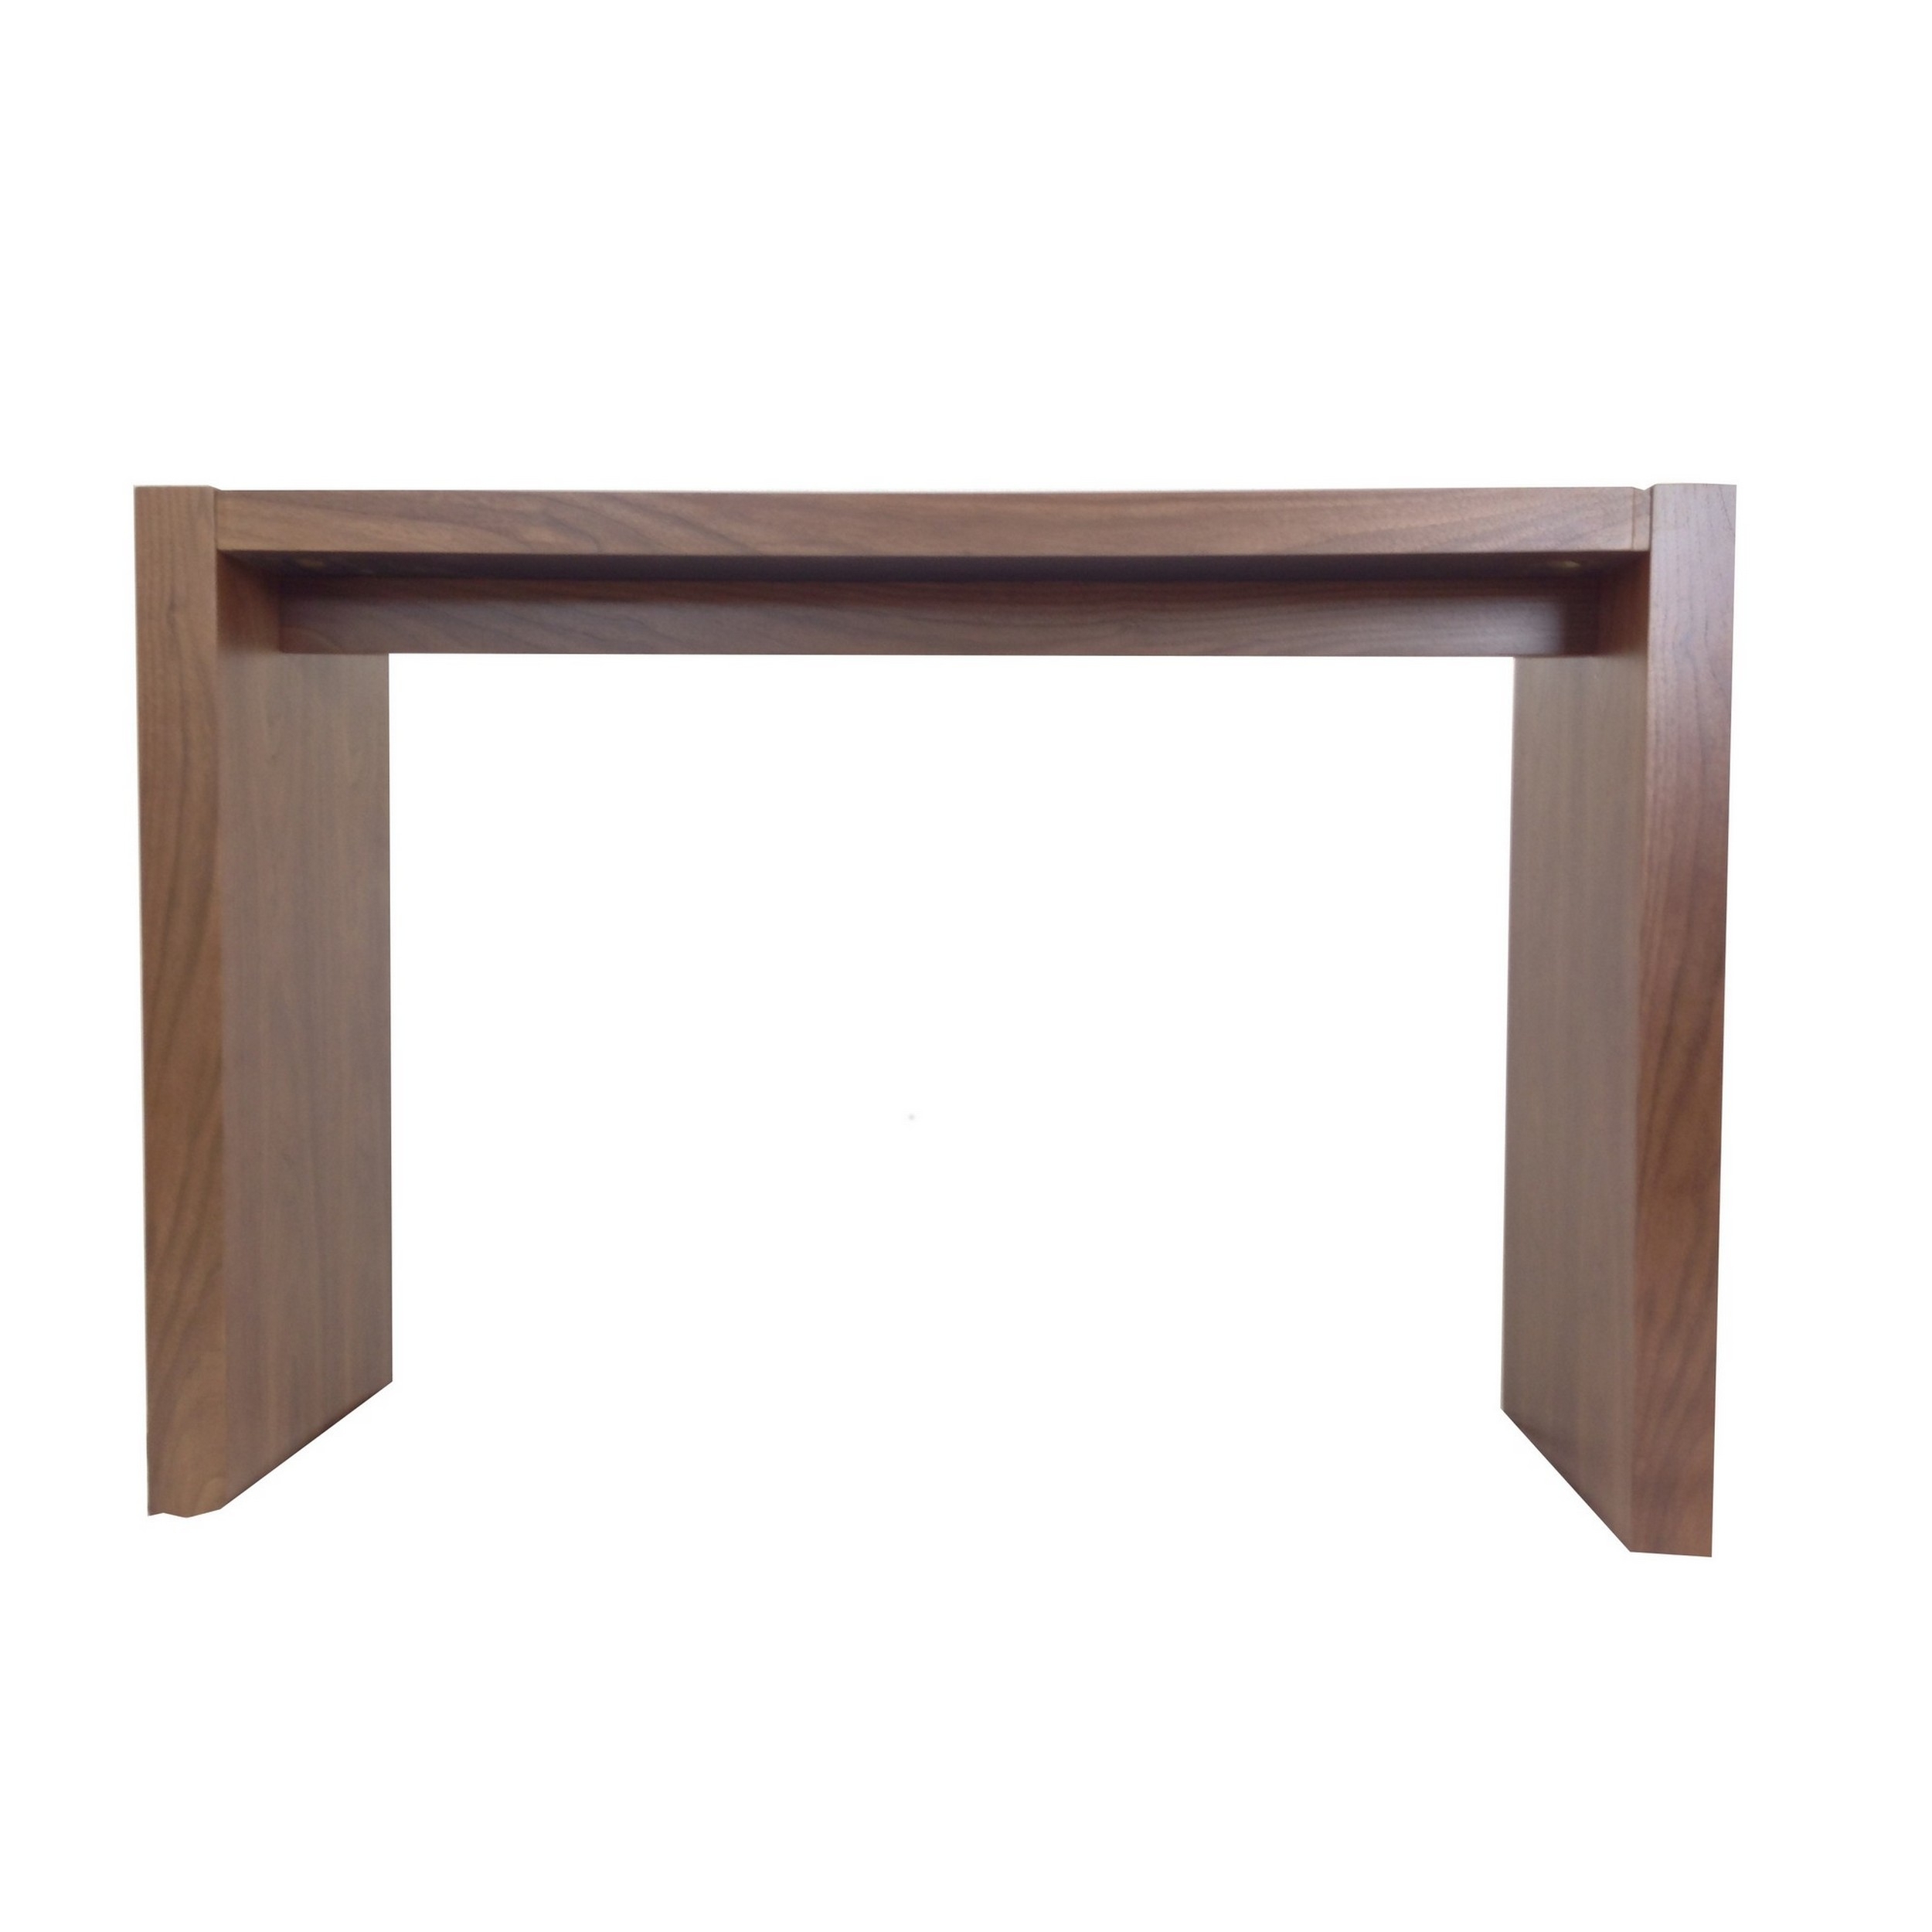 Joey 60 Inch Modern Bar Table, Lacquered Brown Finish, Composite Wood Frame - Saltoro Sherpi